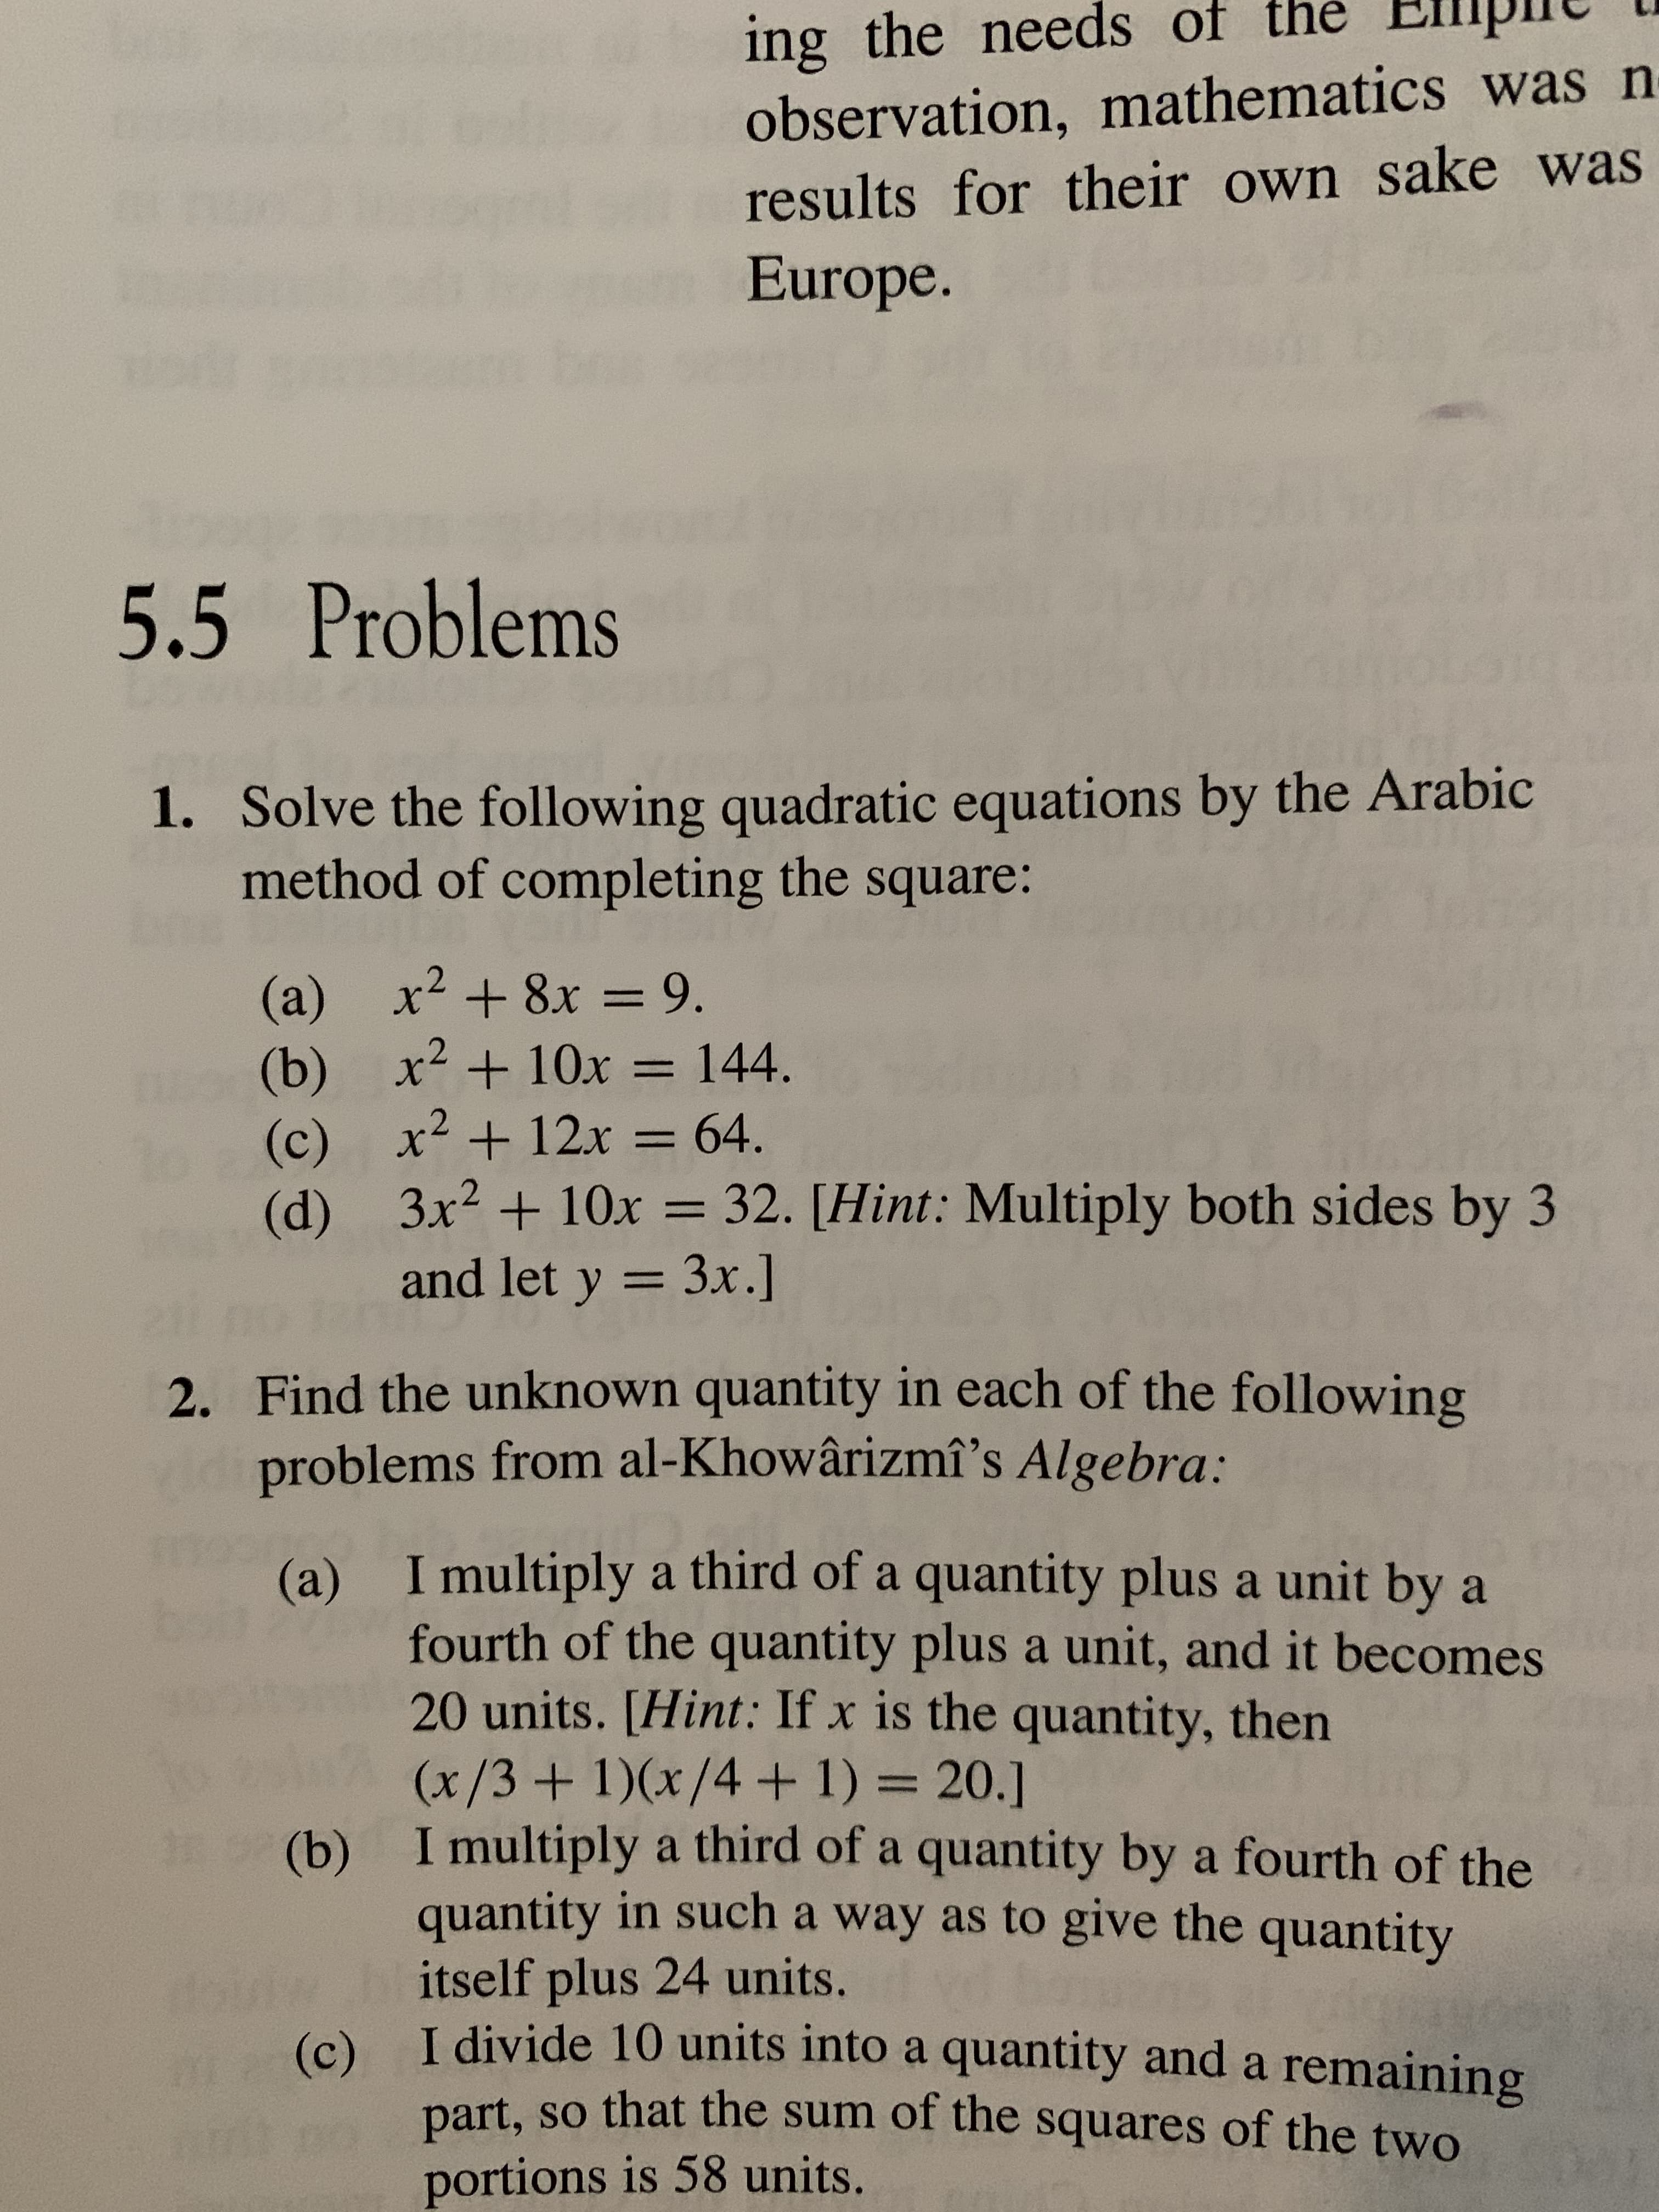 ing the needs of
observation, mathematics was n
results for their own sake was
Europe.
5.5 Problems
1. Solve the following quadratic equations by the Arabic
method of completing the square:
(a) x28x = 9.
(b) х2
(c) x2
3x2+10x 32. [Hint: Multiply both sides by 3
+ 10x = 144.
+12x = 64.
(d)
and let y
3x.]
2. Find the unknown quantity in each of the following
problems from al-Khowârizmî's Algebra:
(a) I multiply a third of a quantity plus a unit by a
fourth of the quantity plus a unit, and it becomes
20 units. [Hint: If x is the quantity, then
(x/3+1)(x/4 + 1) = 20.]
(b) I multiply a third of a quantity by a fourth of the
quantity in such a way as to give the quantity
itself plus 24 units.
I divide 10 units into a quantity and a remaining
(c)
part, so that the sum of the squares of the two
portions is 58 units.
